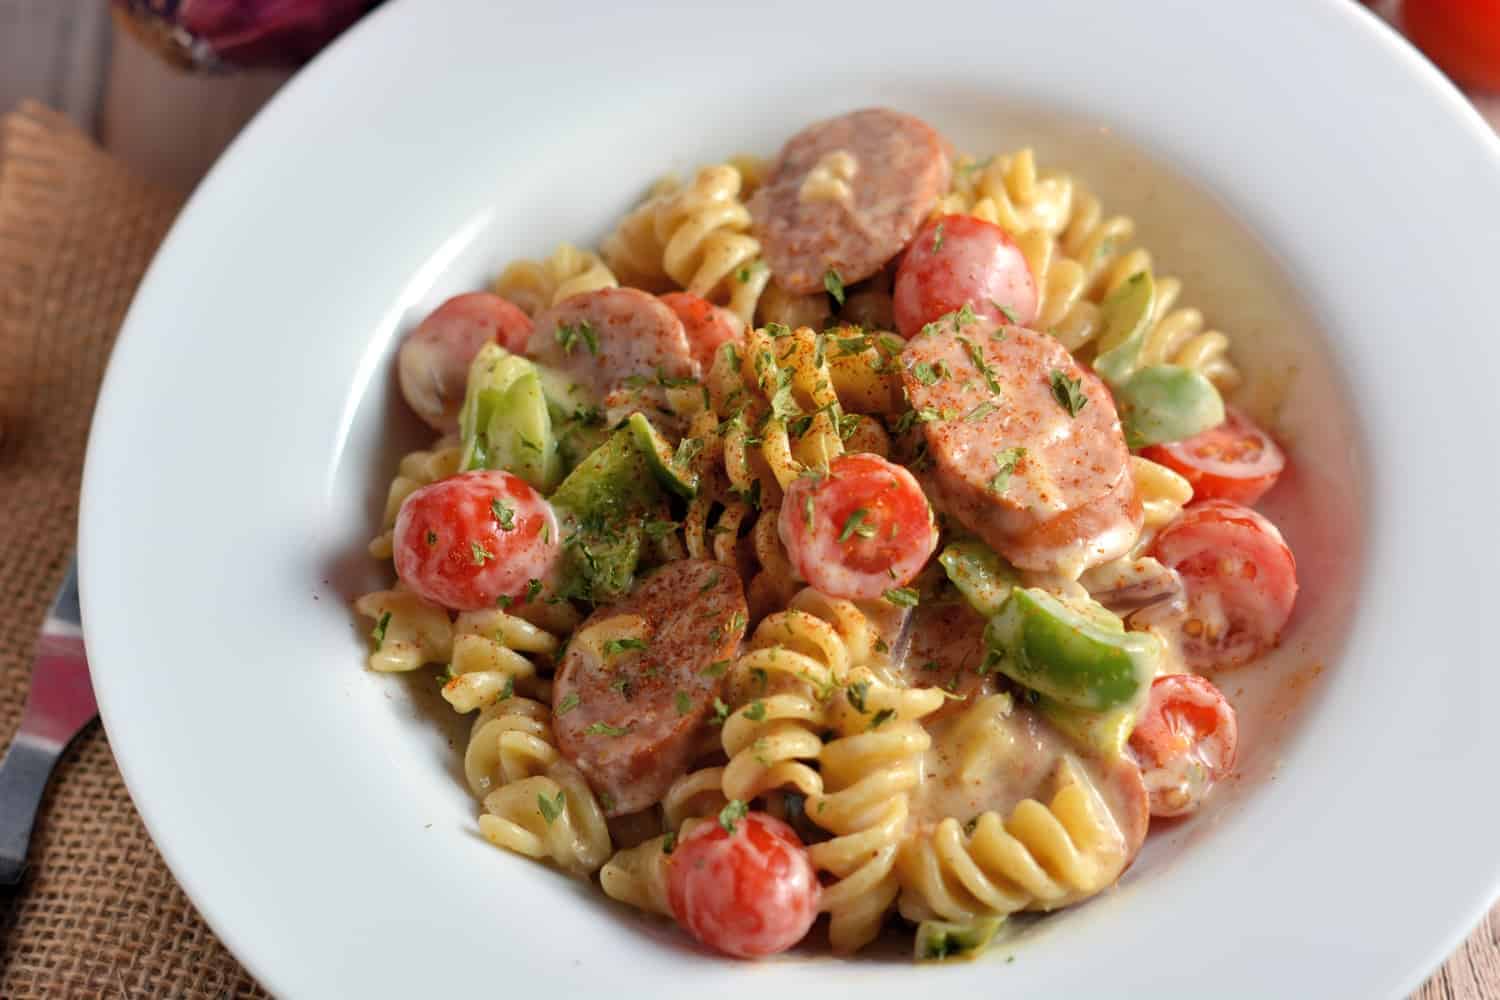 Creamy Cajun Pasta is rotini in a cream sauce with cajun seasoning, smoky andouille sausage, sautéed peppers, red onion and grape tomatoes. Takes 20 minutes to make! #cajunpasta #easypastadishes www.savoryexperiments.com 